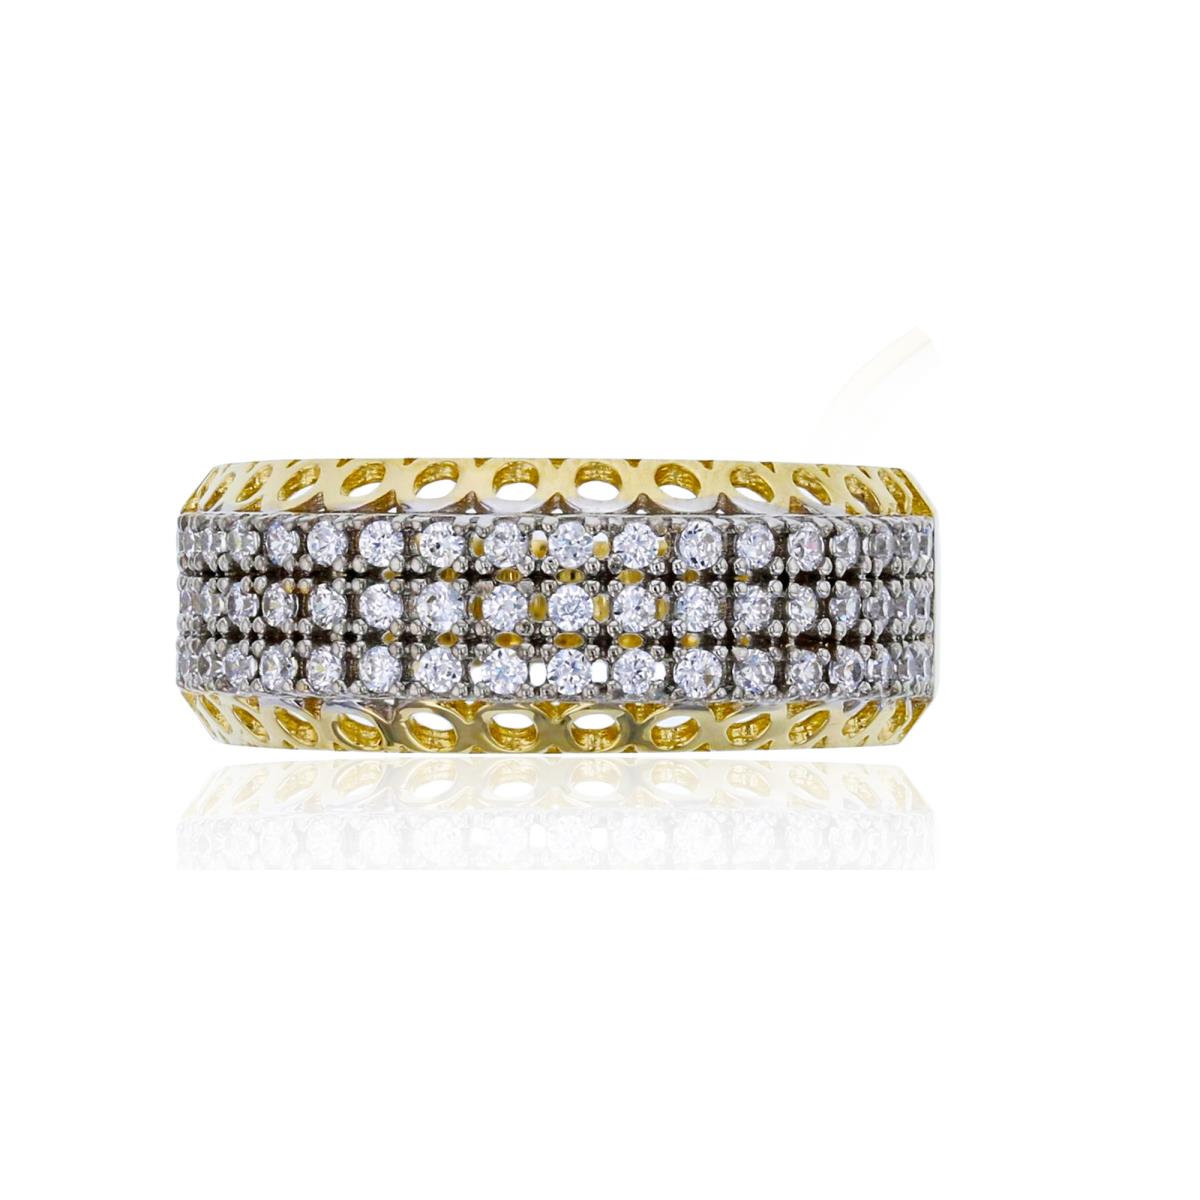 10K Tow-Tone Gold Micropave Three Row Top Open Bubble Side Anniversary Ring